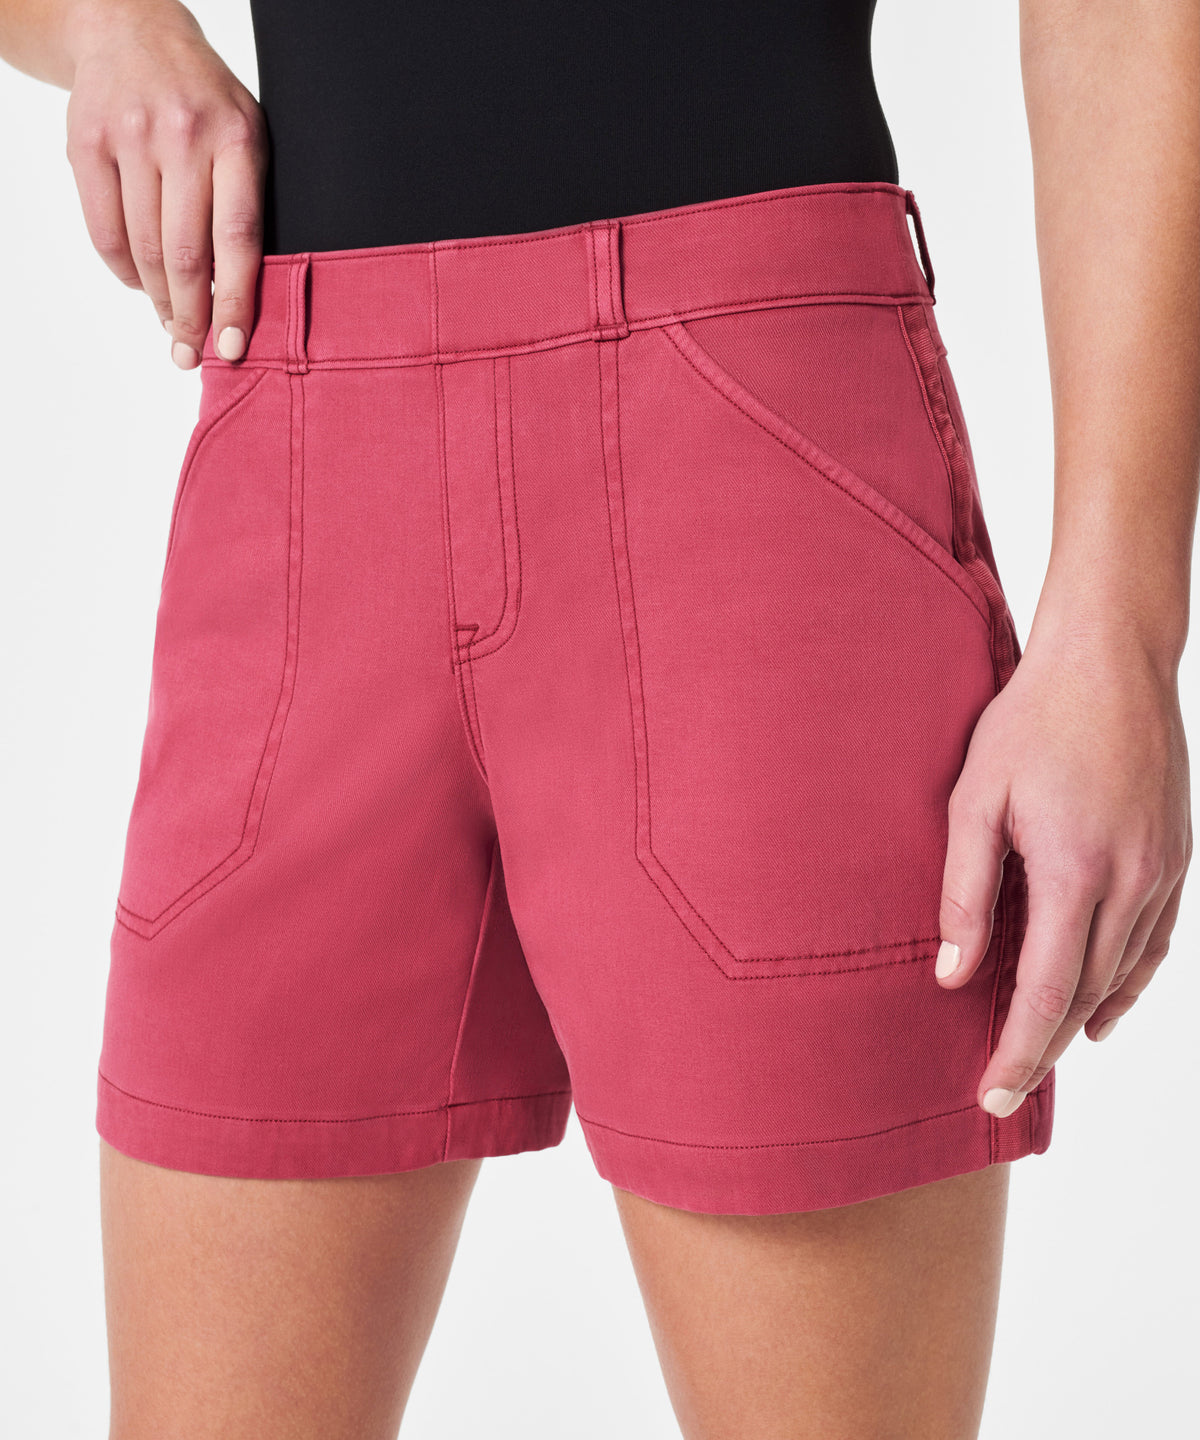 Spanx Stretch Twill Shorts, 6 - Wild Rose – She She Boutique